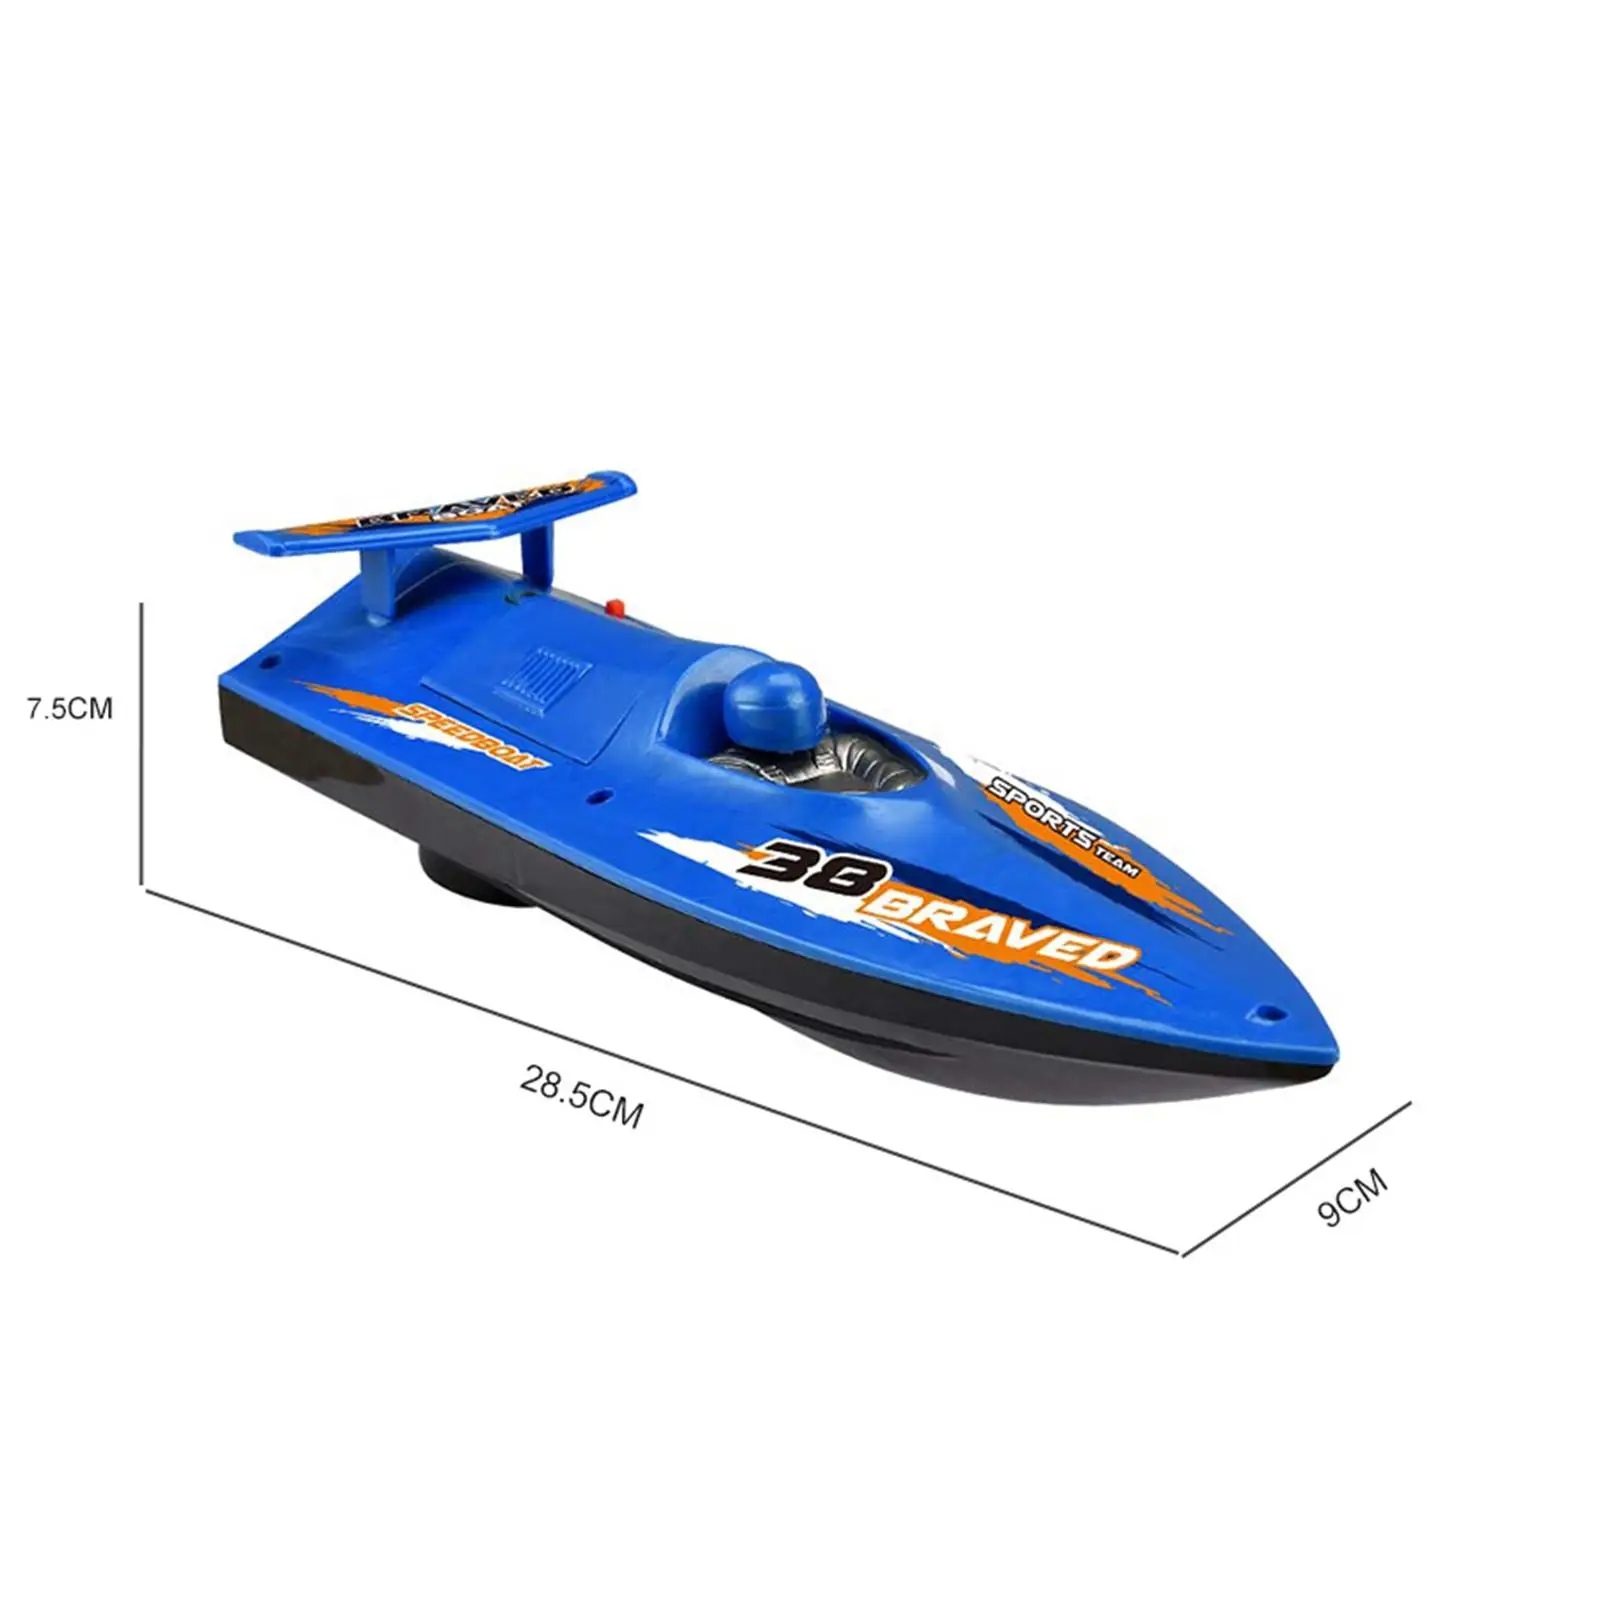 Yacht Pool Toy Floating Toy Boats, Motorboat Speed Boat Bathtub Toy, Bath Boat Toy for Outdoor Child Boys Girls Infant